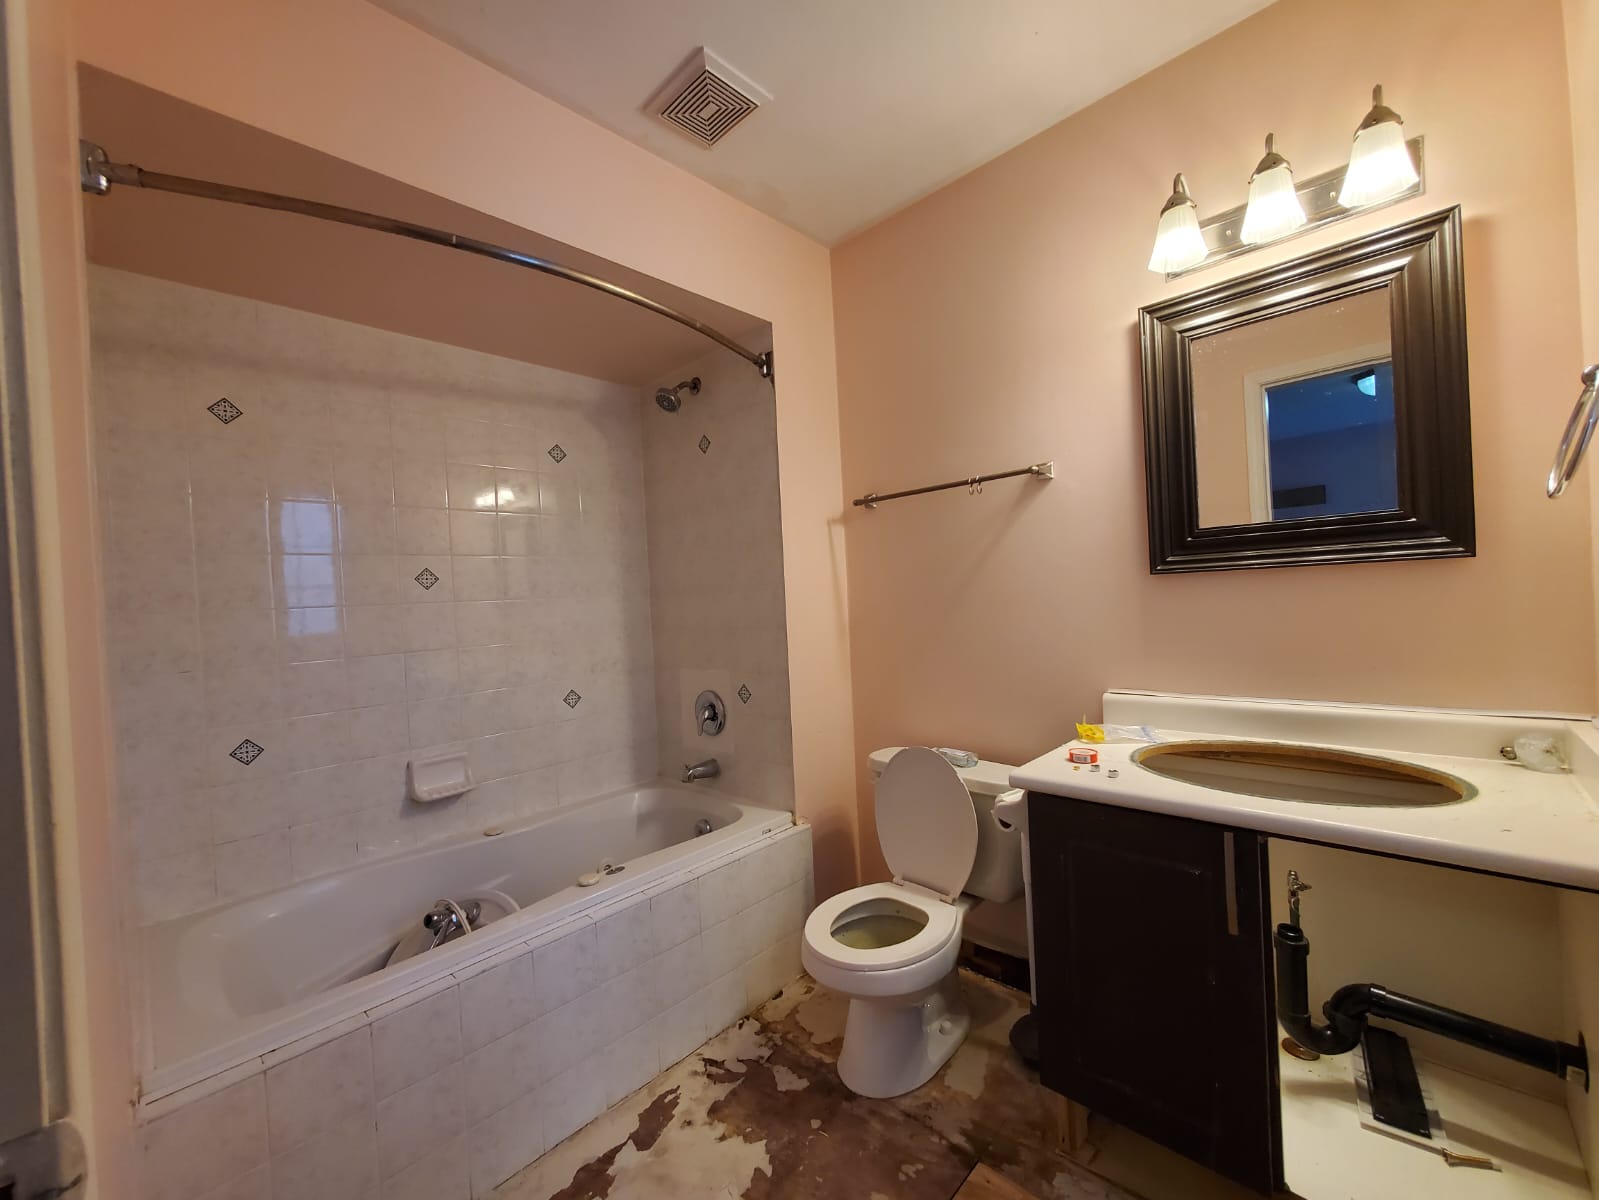 3 piece bathroom renovation project before construction - bathroom renovations before and after pictures